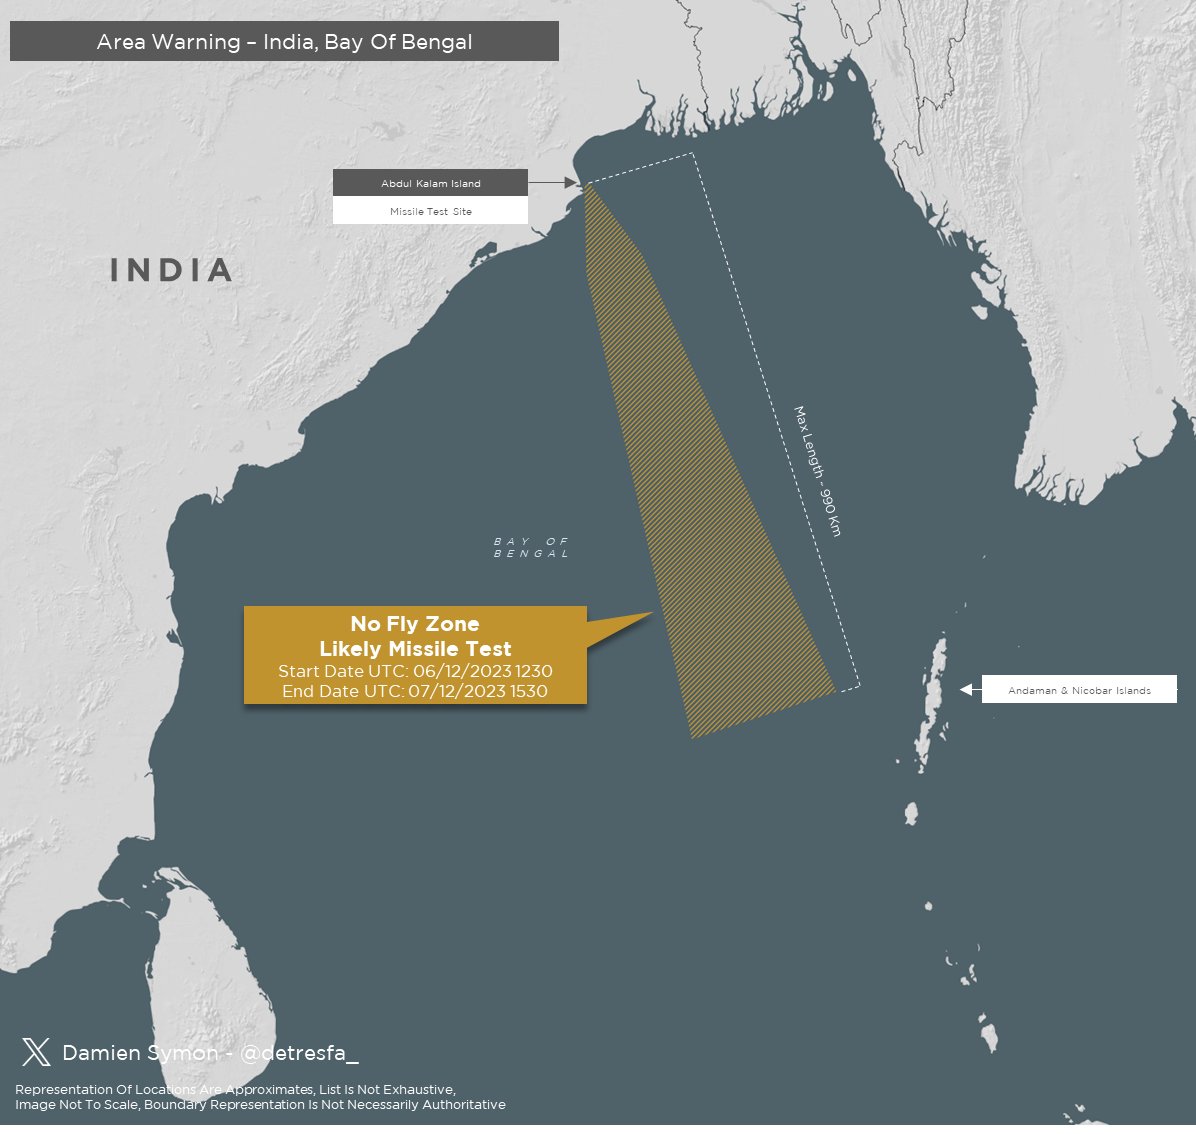 #AreaWarning #India issues a notification for a no fly zone over the Bay Of Bengal, indicative of a likely missile test Dates | 06-07 December 2023